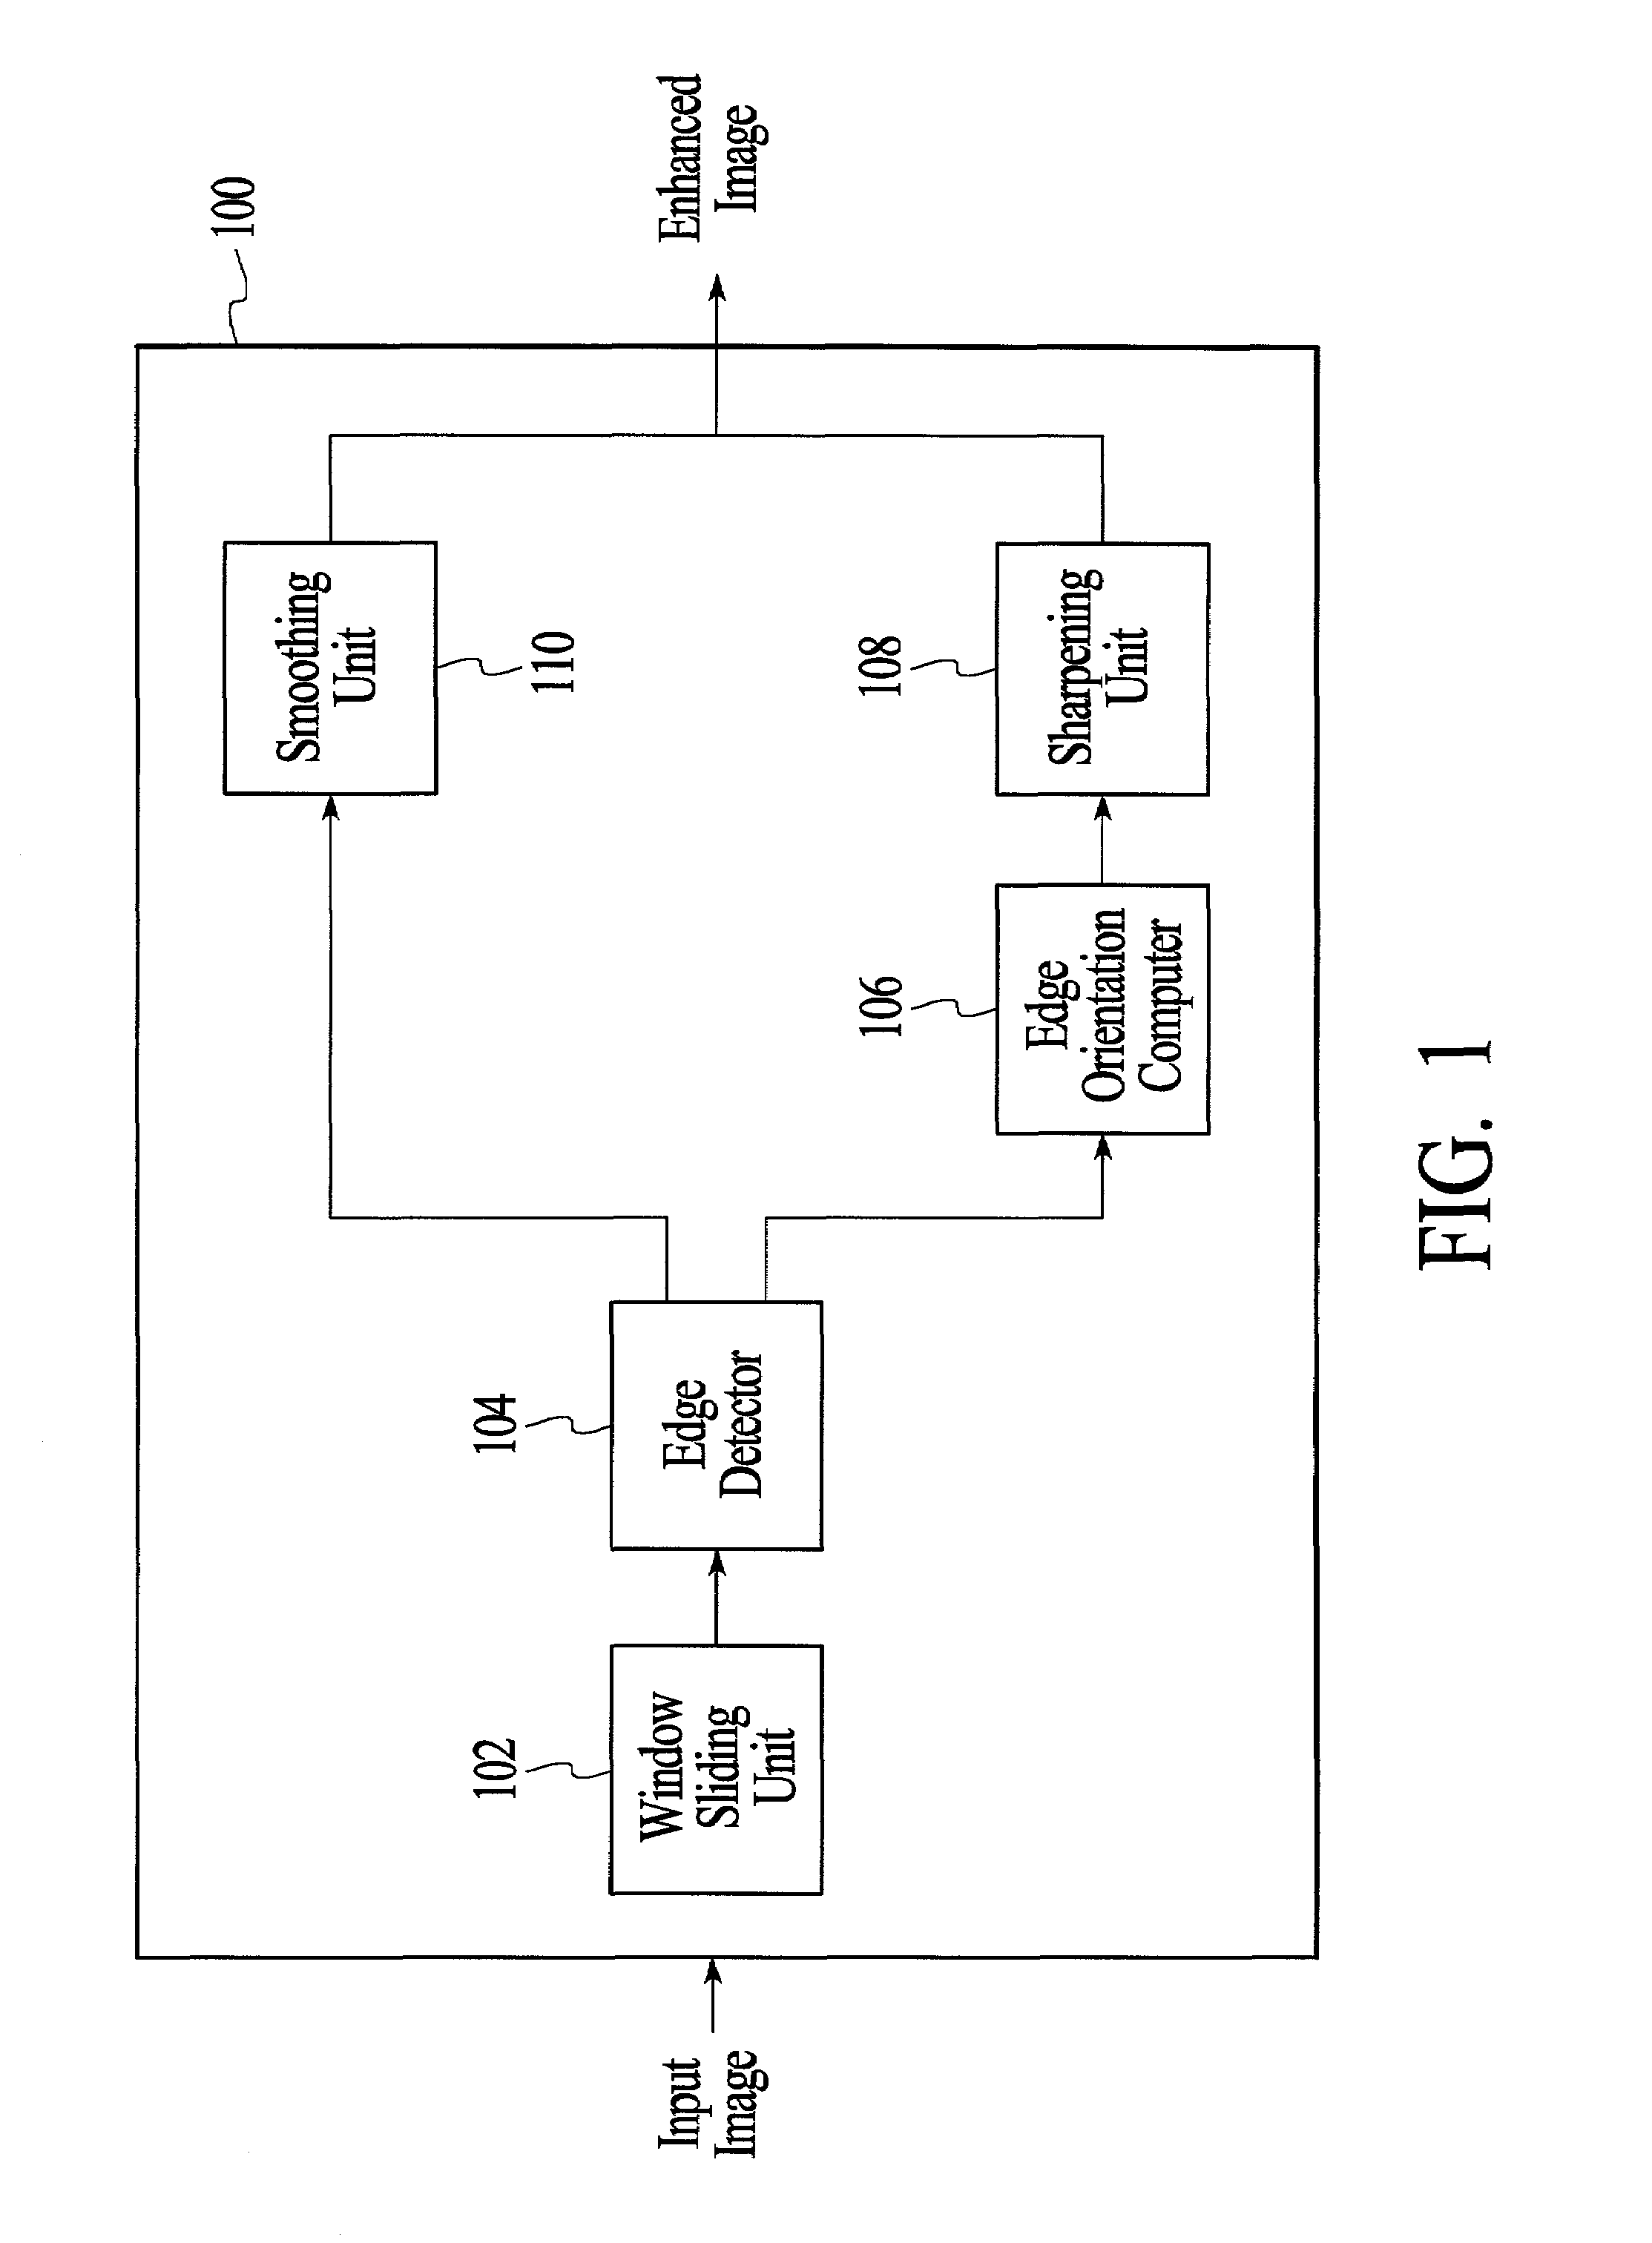 Method and system for enhancing images using edge orientation